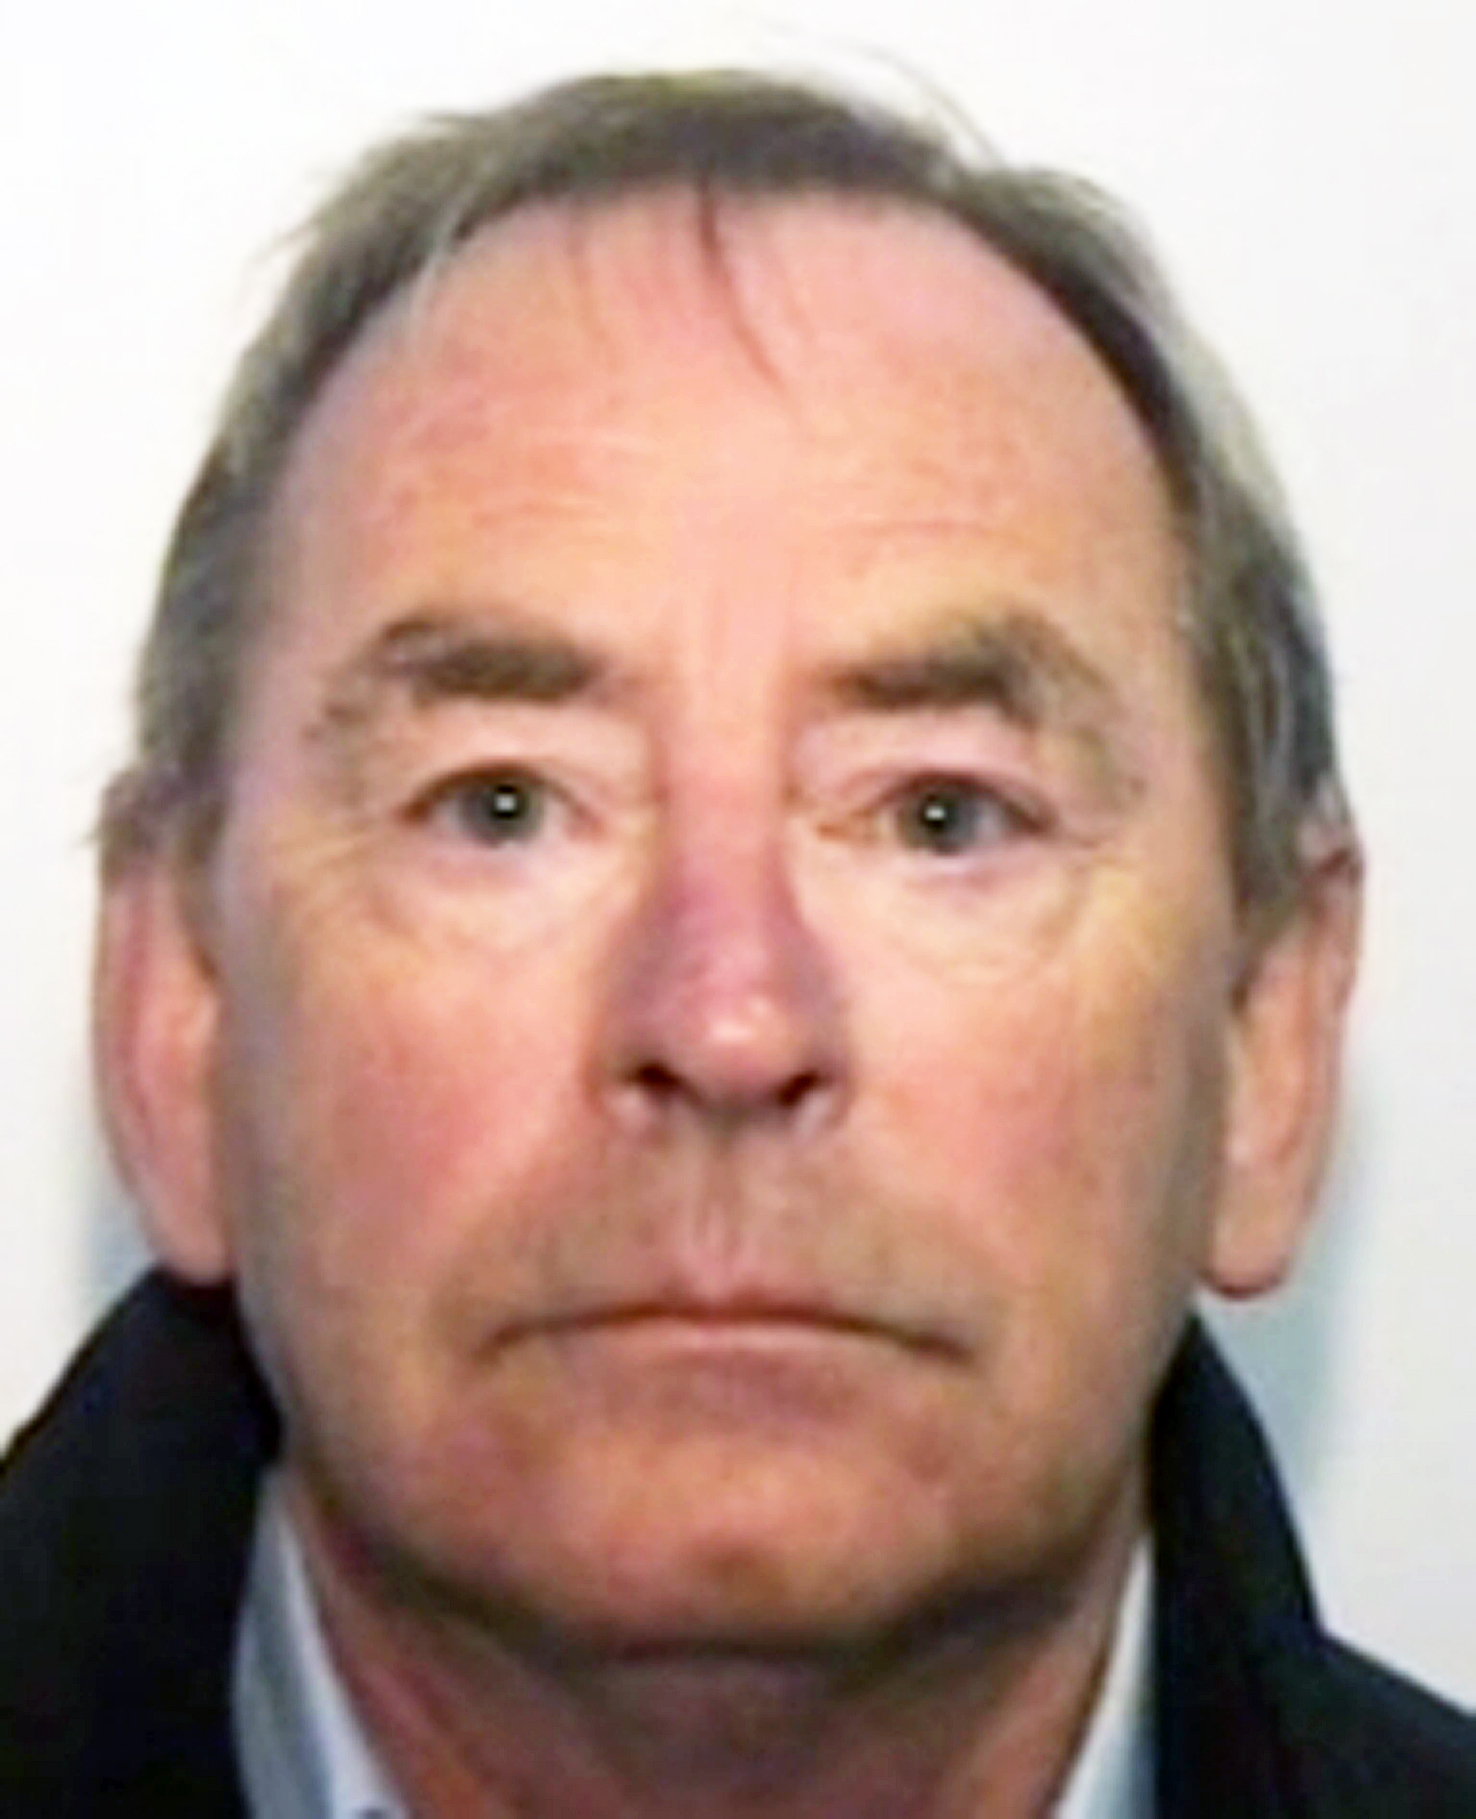 Former TV weatherman Fred Talbot. The 67-year-old indecently assaulted seven teenage boys in his care during camping and boating trips in the 1970s and 1980s while working as a biology teacher at a school in the Manchester area. (Greater Manchester Police/PA Wire)